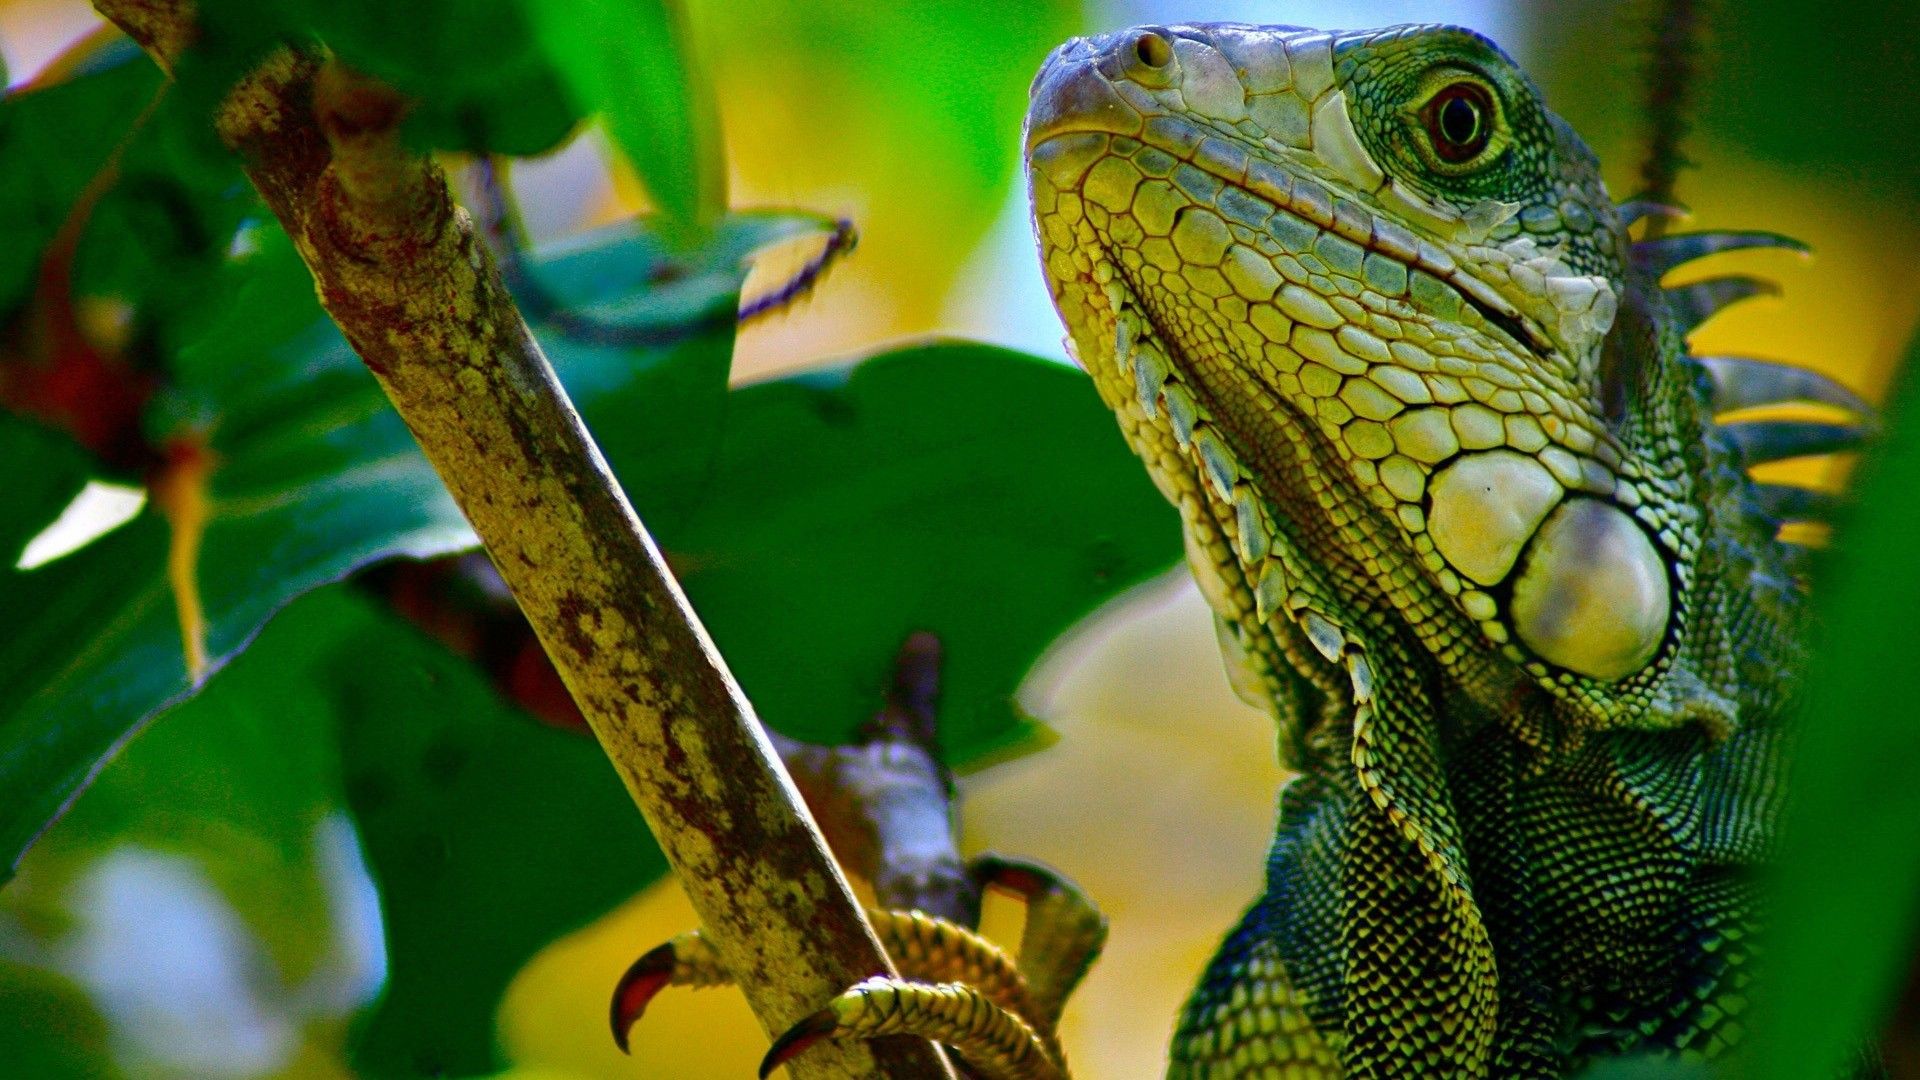 HD wallpaper, Iguana, Pictures